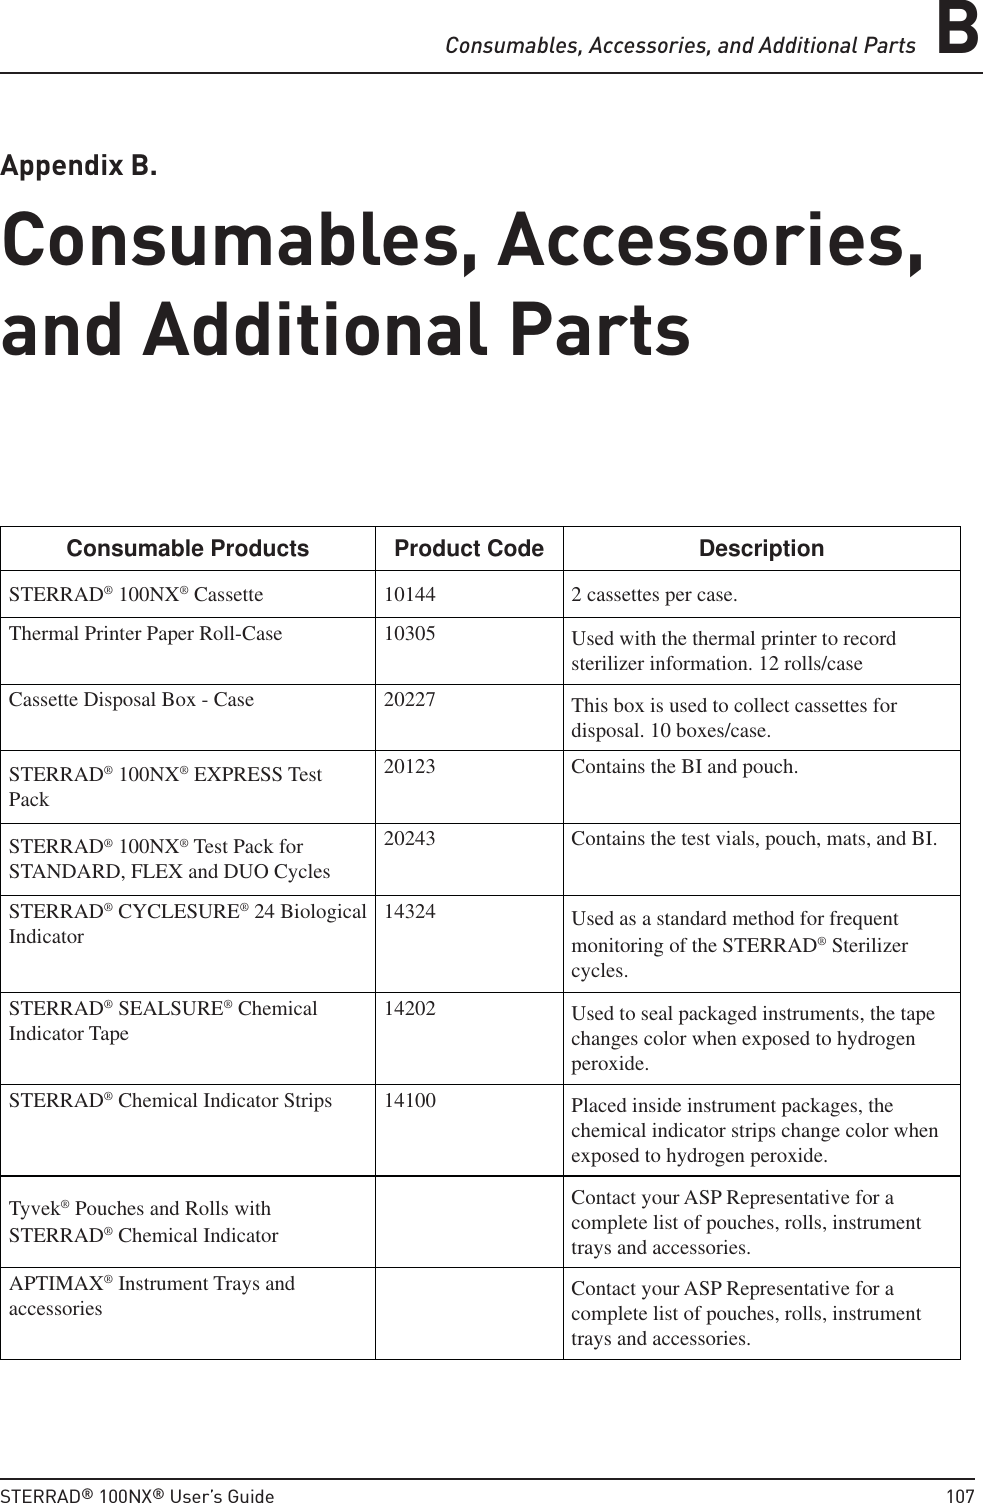 Consumables, Accessories, and Additional Parts BSTERRAD® 100NX® User’s Guide  107Appendix B. Consumables, Accessories, and Additional PartsConsumables, Accessories, and Additional PartsConsumable Products Product Code DescriptionSTERRAD® 100NX® Cassette 10144 2 cassettes per case.Thermal Printer Paper Roll-Case 10305 Used with the thermal printer to record sterilizer information. 12 rolls/caseCassette Disposal Box - Case 20227 This box is used to collect cassettes for disposal. 10 boxes/case.STERRAD® 100NX® EXPRESS Test Pack20123 Contains the BI and pouch.STERRAD® 100NX® Test Pack for STANDARD, FLEX and DUO Cycles20243 Contains the test vials, pouch, mats, and BI. STERRAD® CYCLESURE® 24 Biological Indicator 14324 Used as a standard method for frequent monitoring of the STERRAD® Sterilizer cycles. STERRAD® SEALSURE® Chemical Indicator Tape 14202 Used to seal packaged instruments, the tape changes color when exposed to hydrogen peroxide.STERRAD® Chemical Indicator Strips 14100 Placed inside instrument packages, the chemical indicator strips change color when exposed to hydrogen peroxide. Tyvek® Pouches and Rolls with STERRAD® Chemical IndicatorContact your ASP Representative for a complete list of pouches, rolls, instrument trays and accessories.APTIMAX® Instrument Trays and accessories Contact your ASP Representative for a complete list of pouches, rolls, instrument trays and accessories.